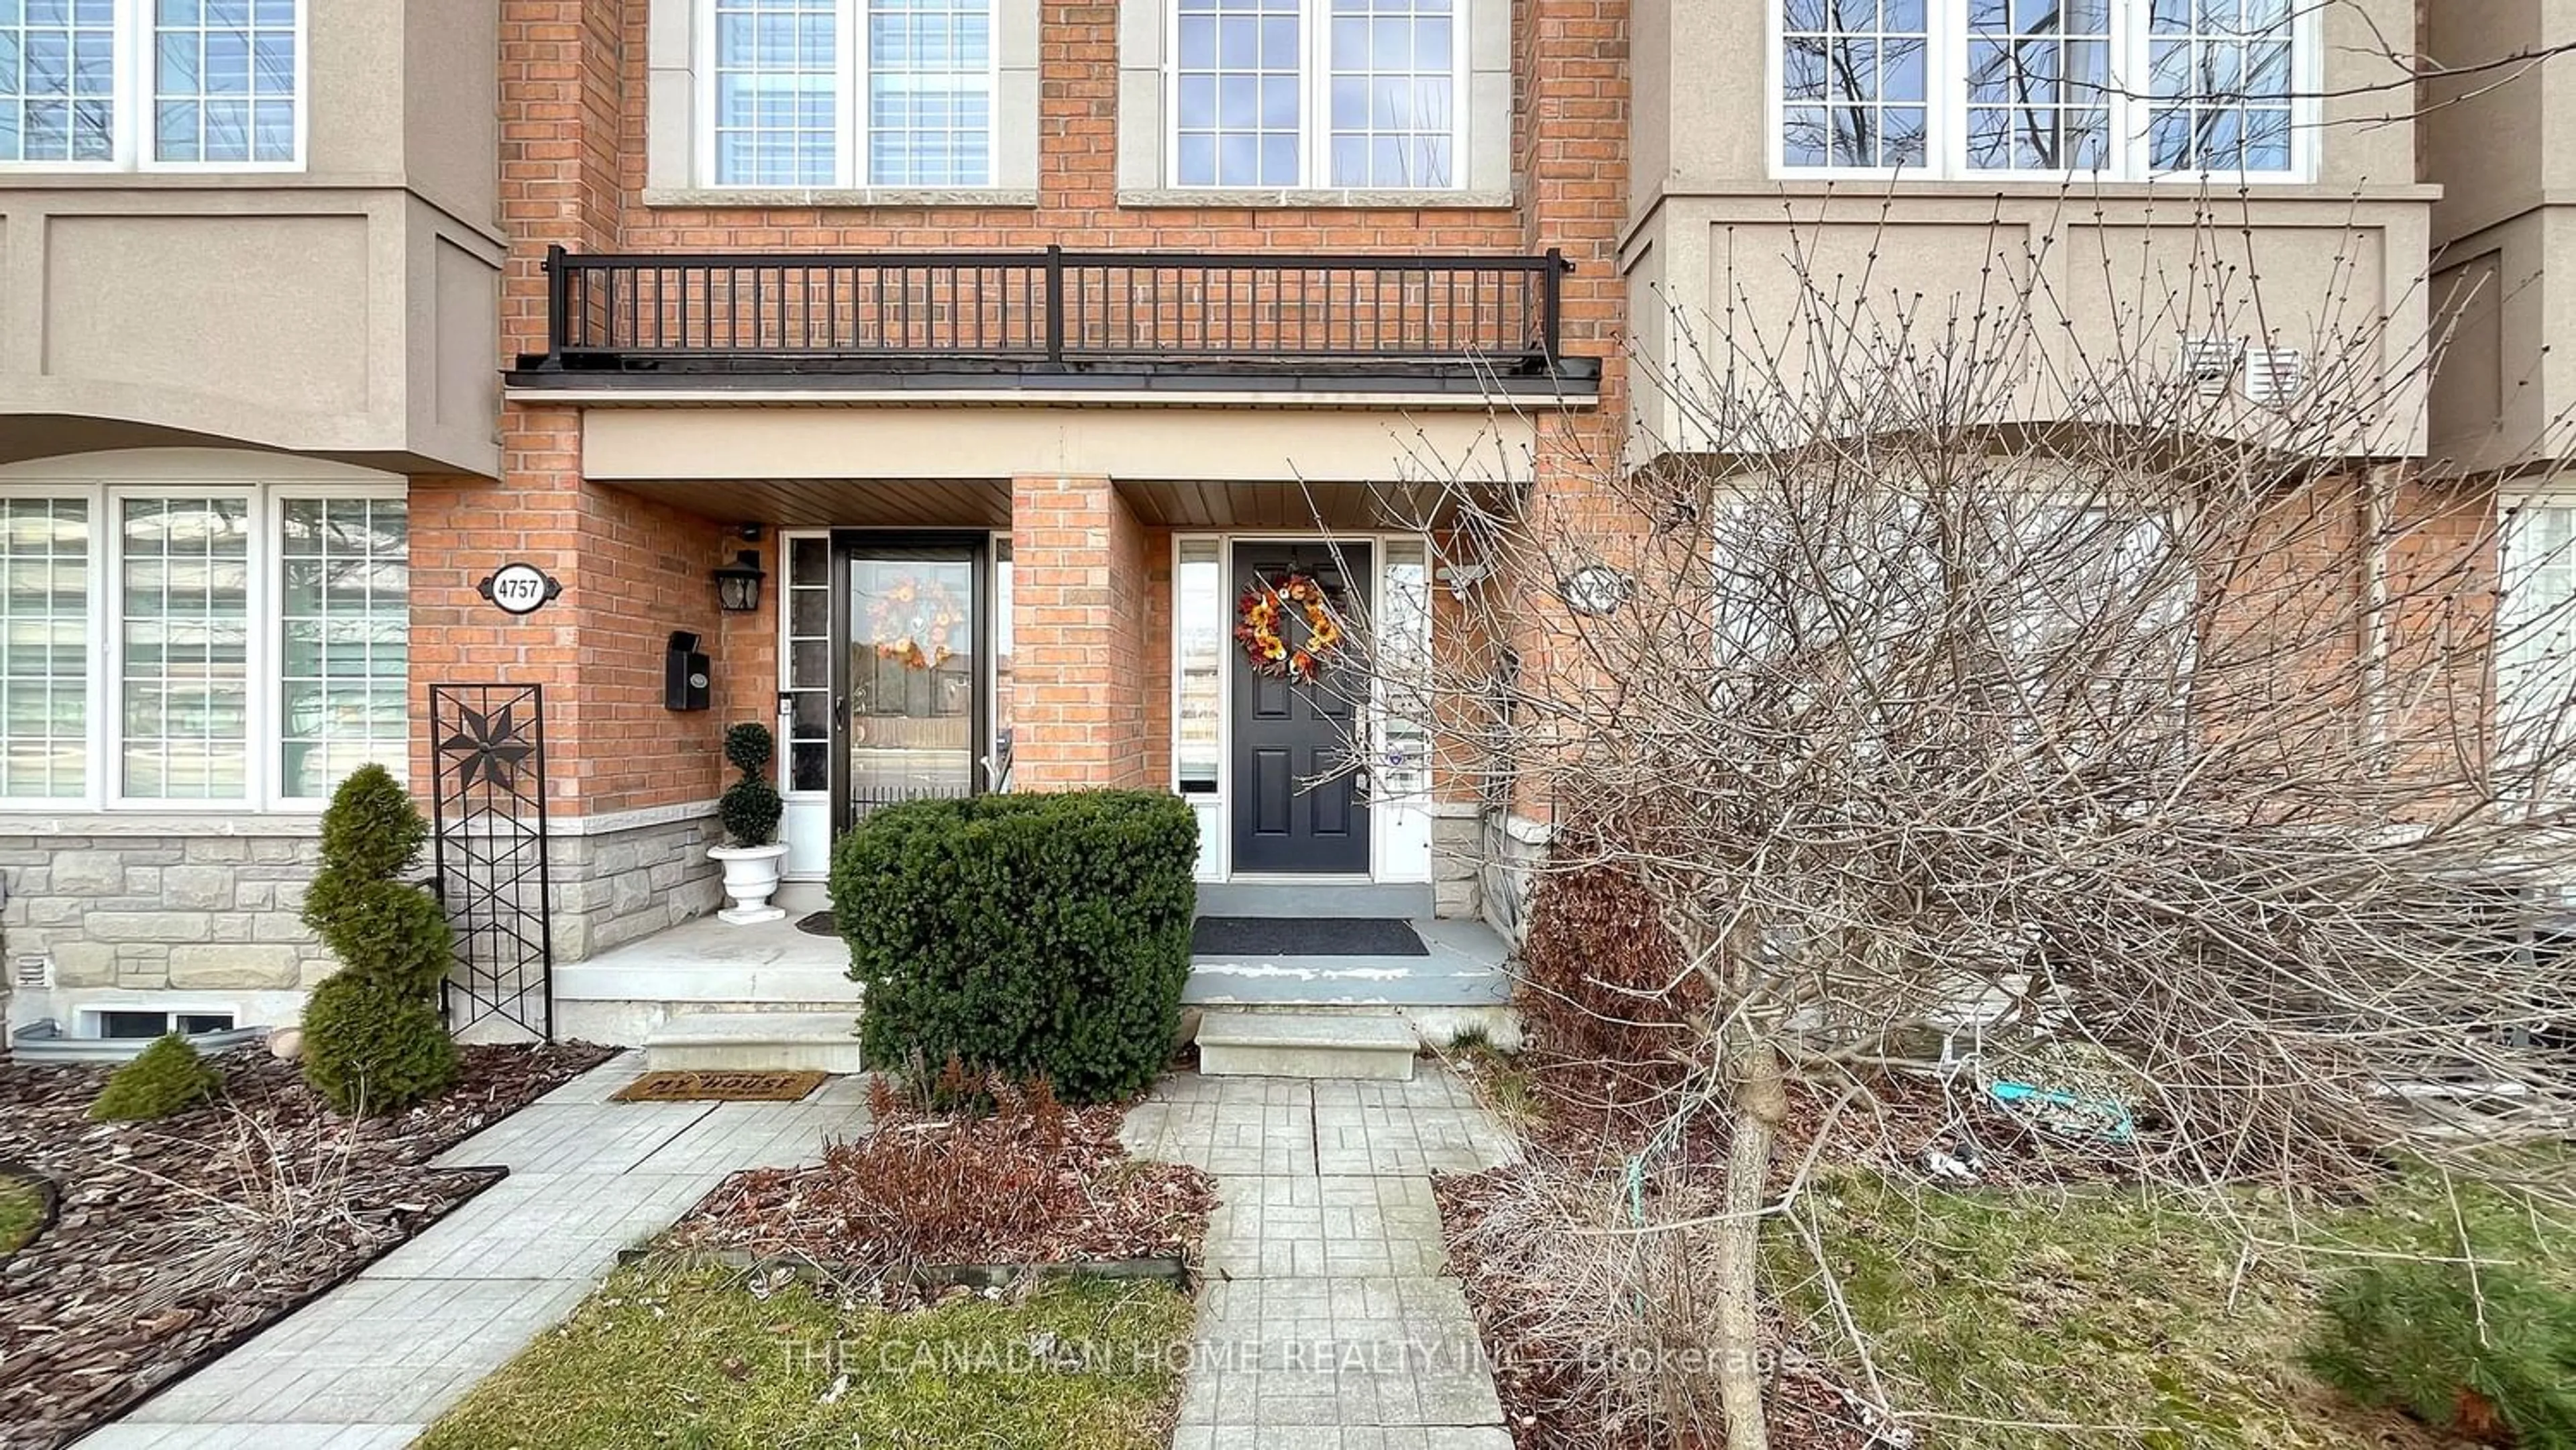 Home with brick exterior material for 4759 Highway 7, Vaughan Ontario L4L 1S6